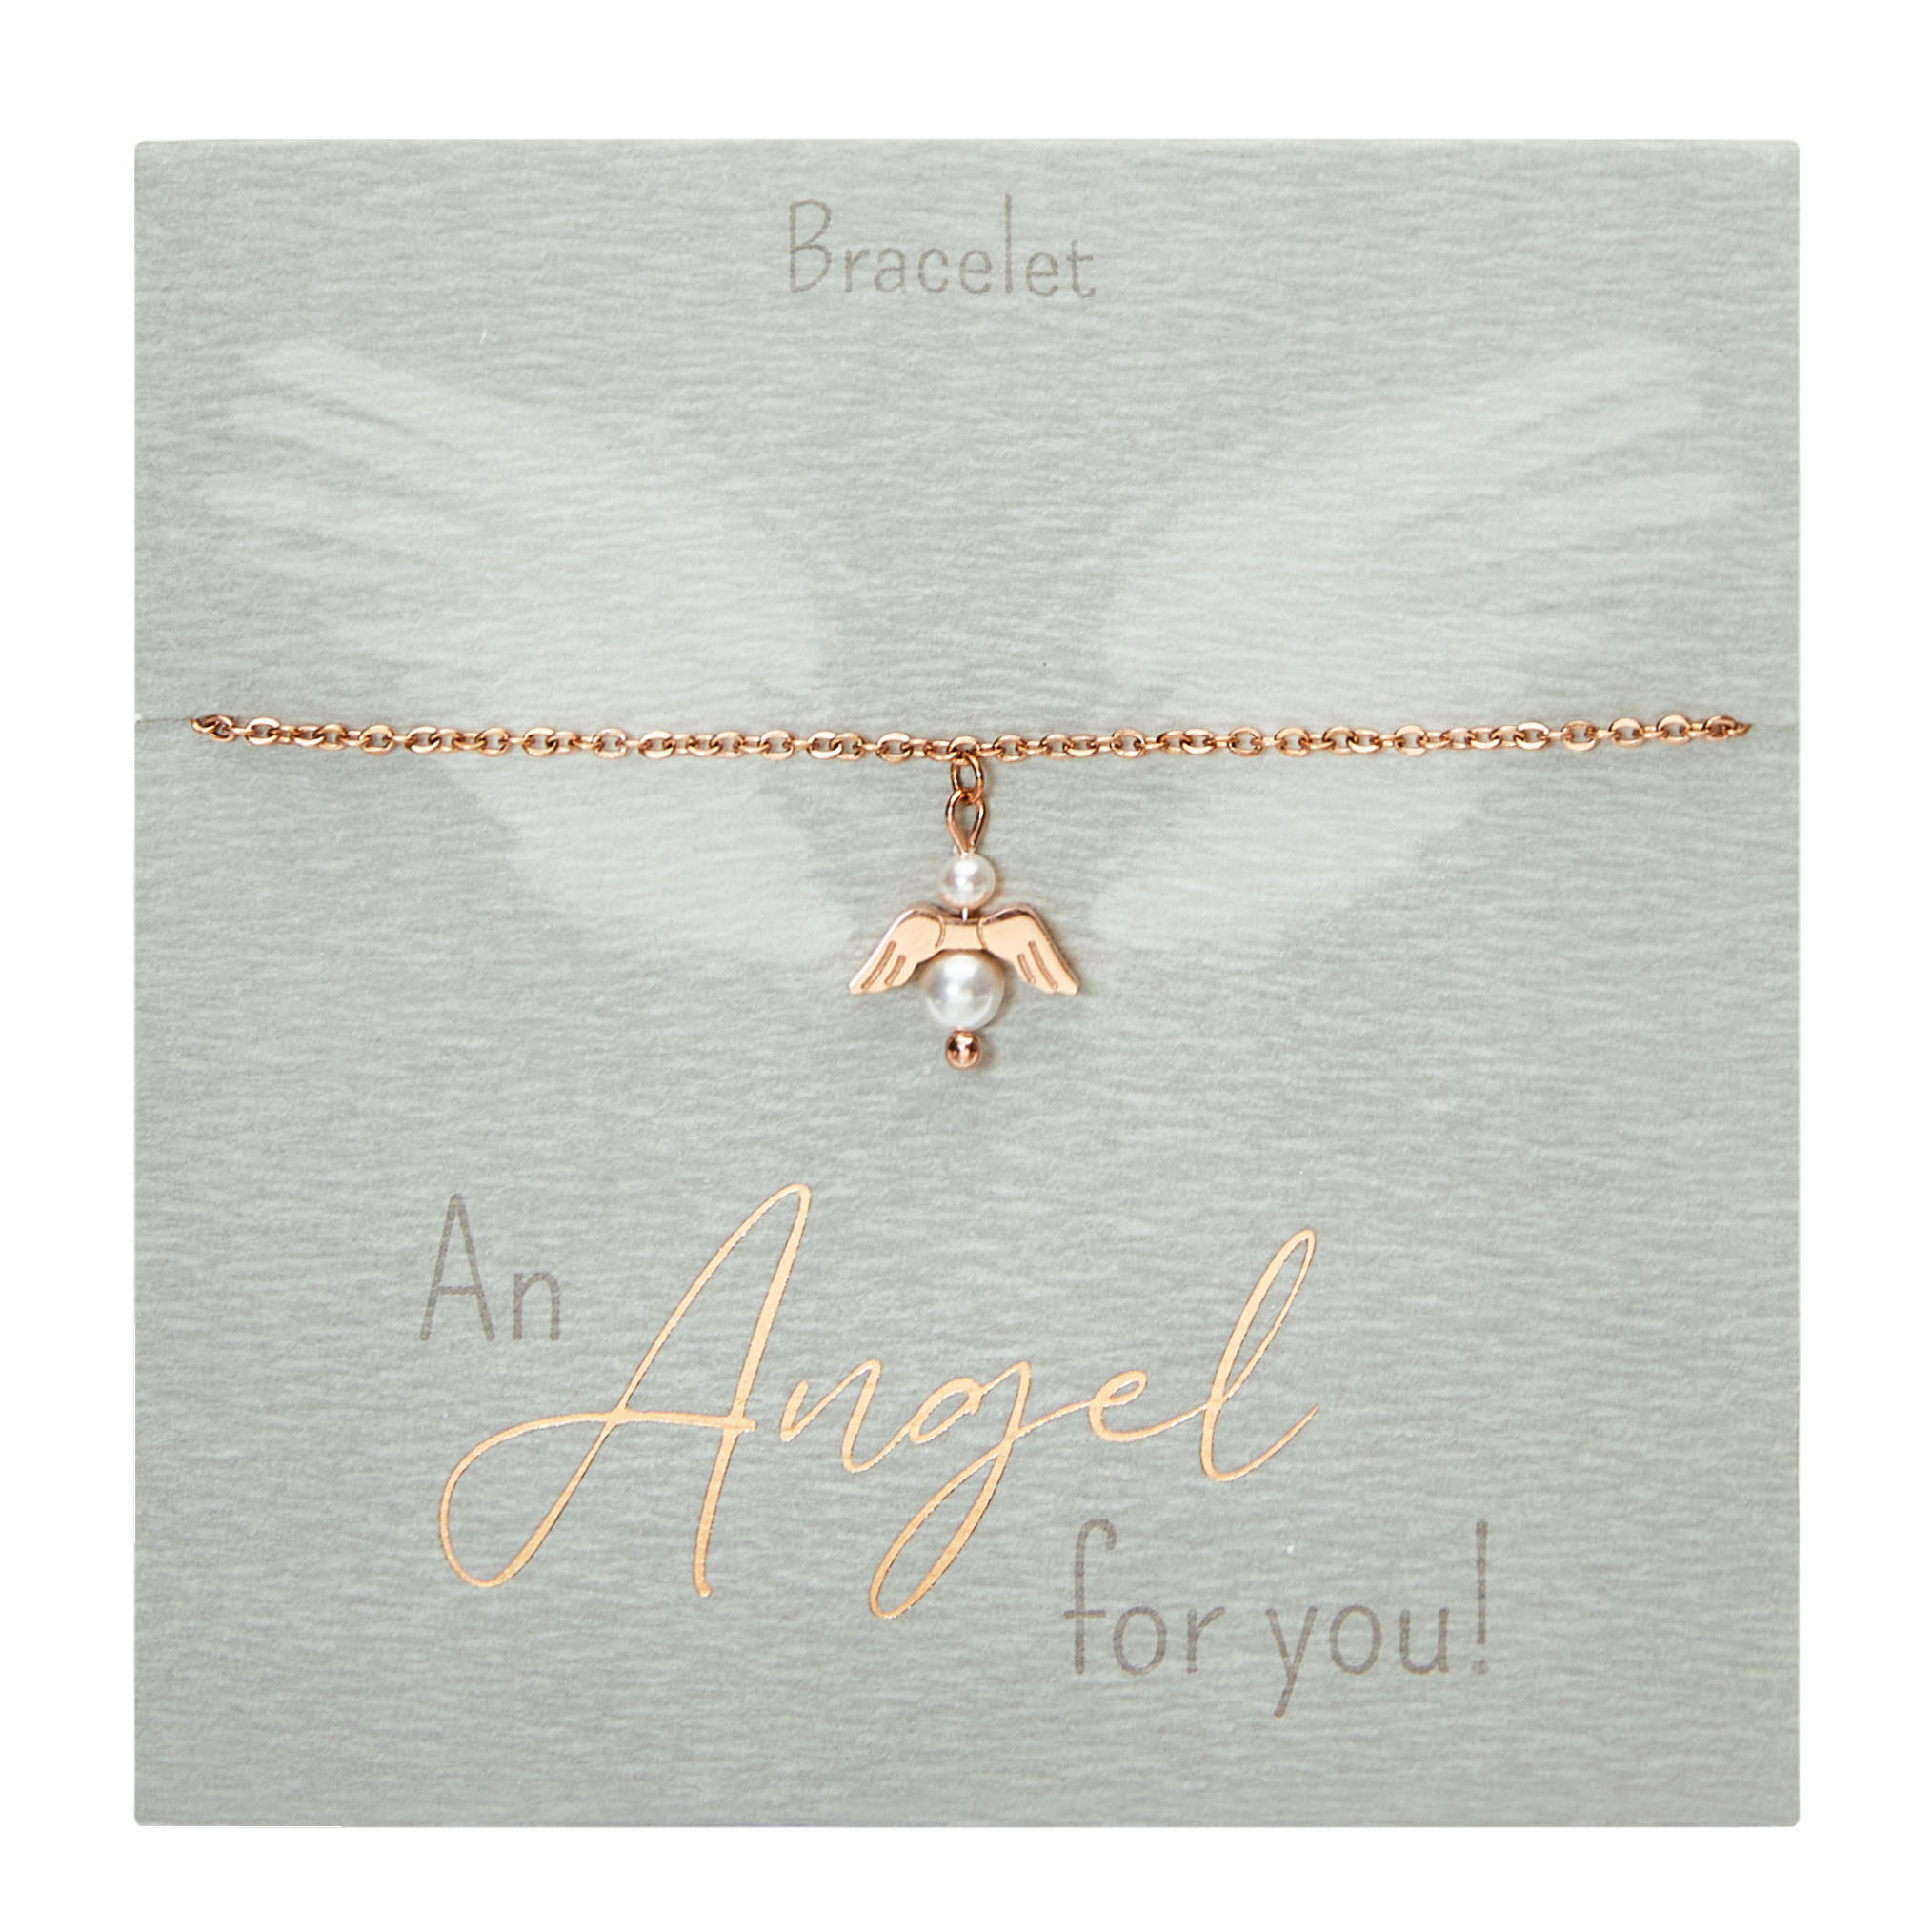 Display bracelets "An Angel for you"